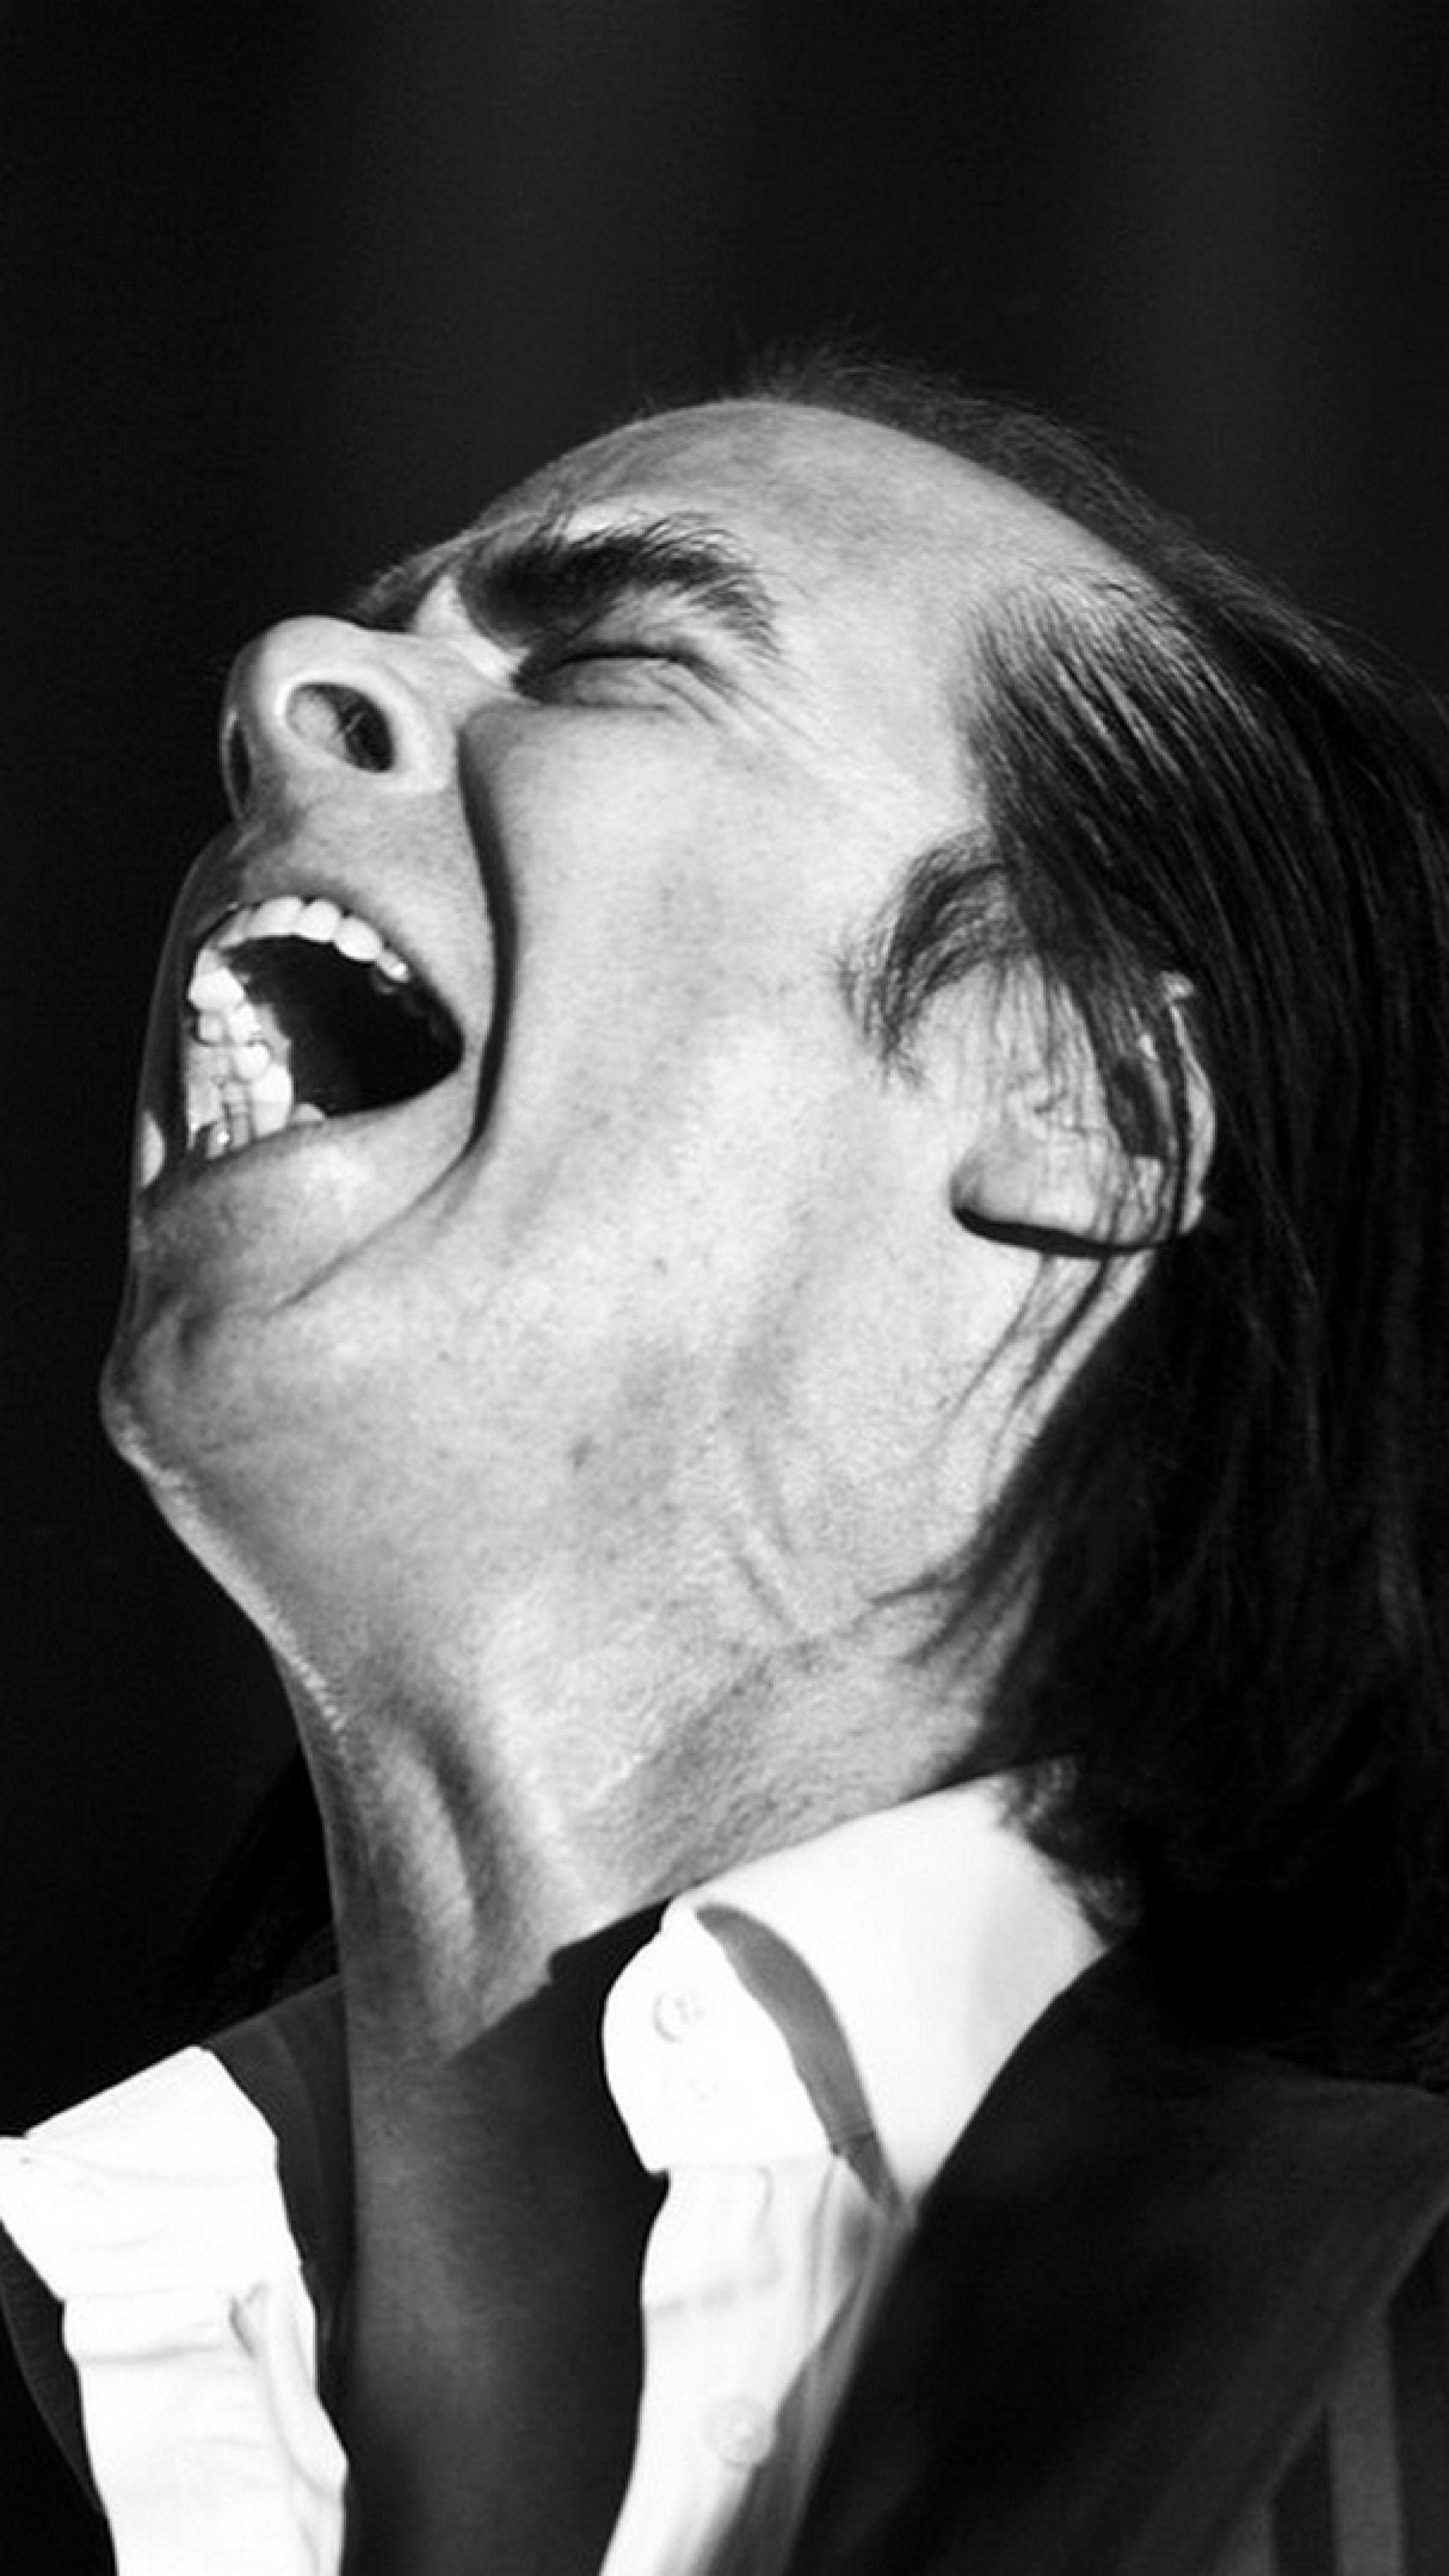 Download Wallpaper 2160x3840 Nick cave, Show, Microphone, Face